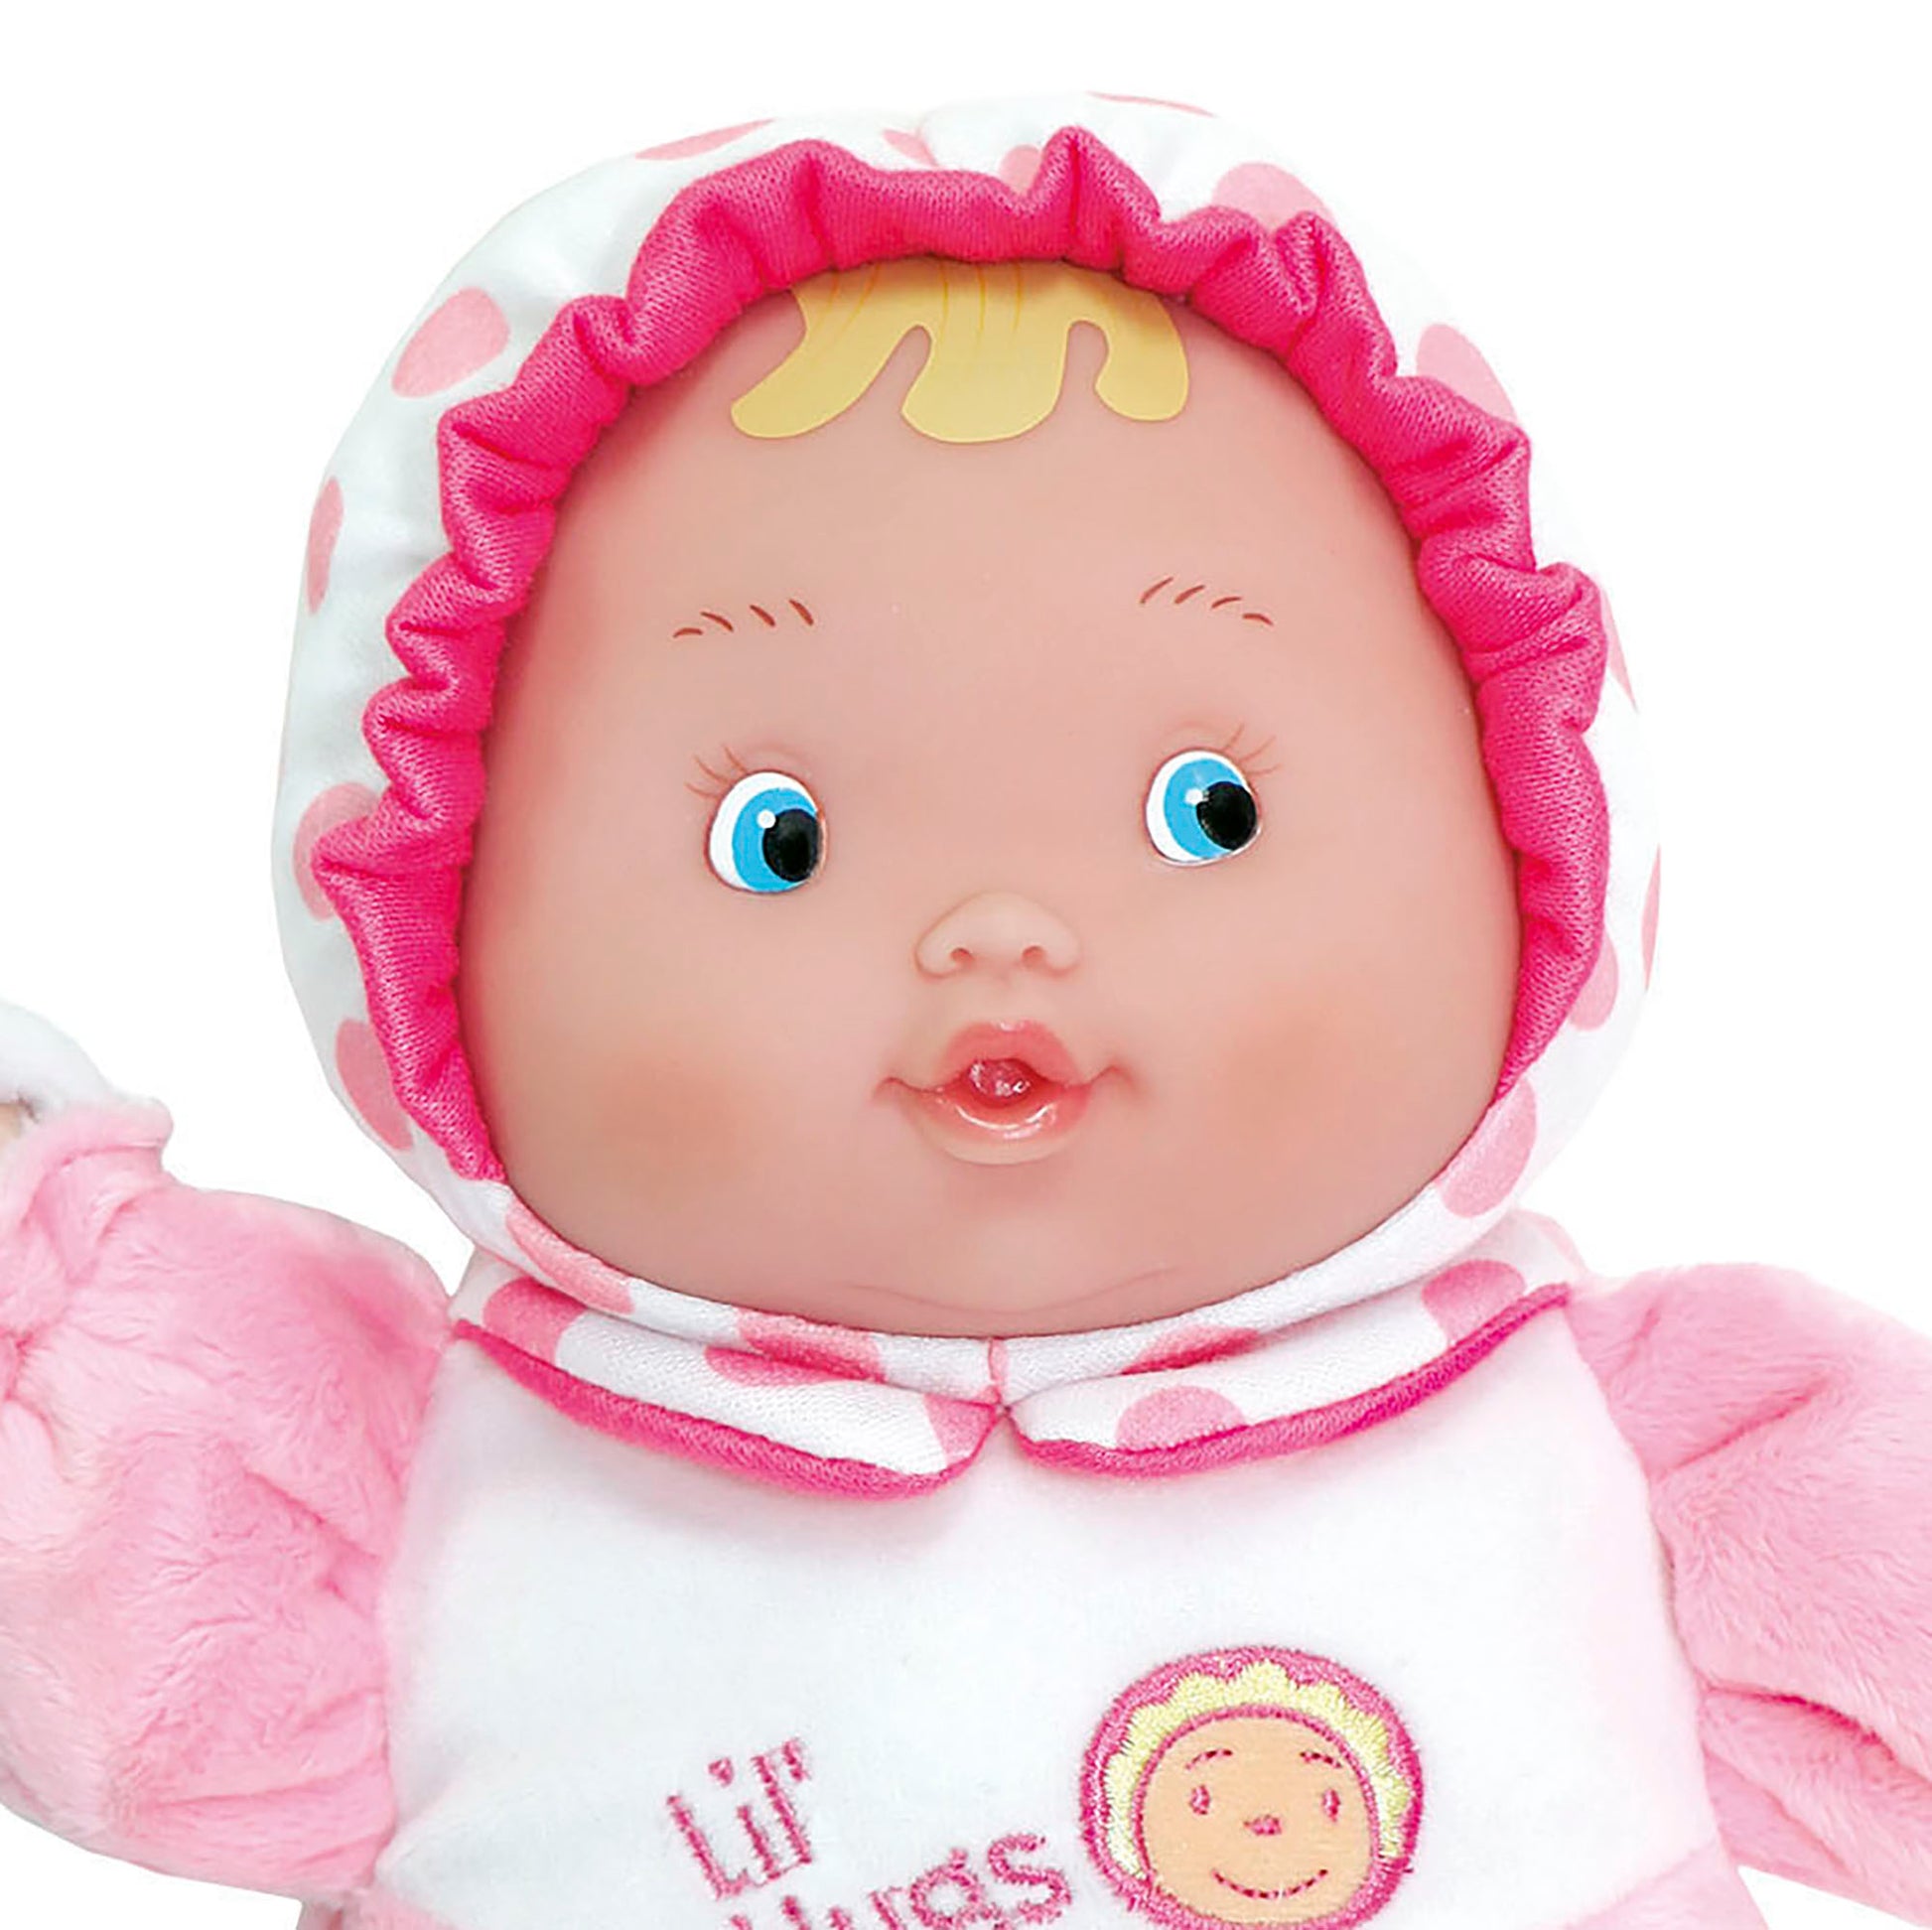 Lil' Hugs 12" Baby's First Doll - JC Toys Group Inc.